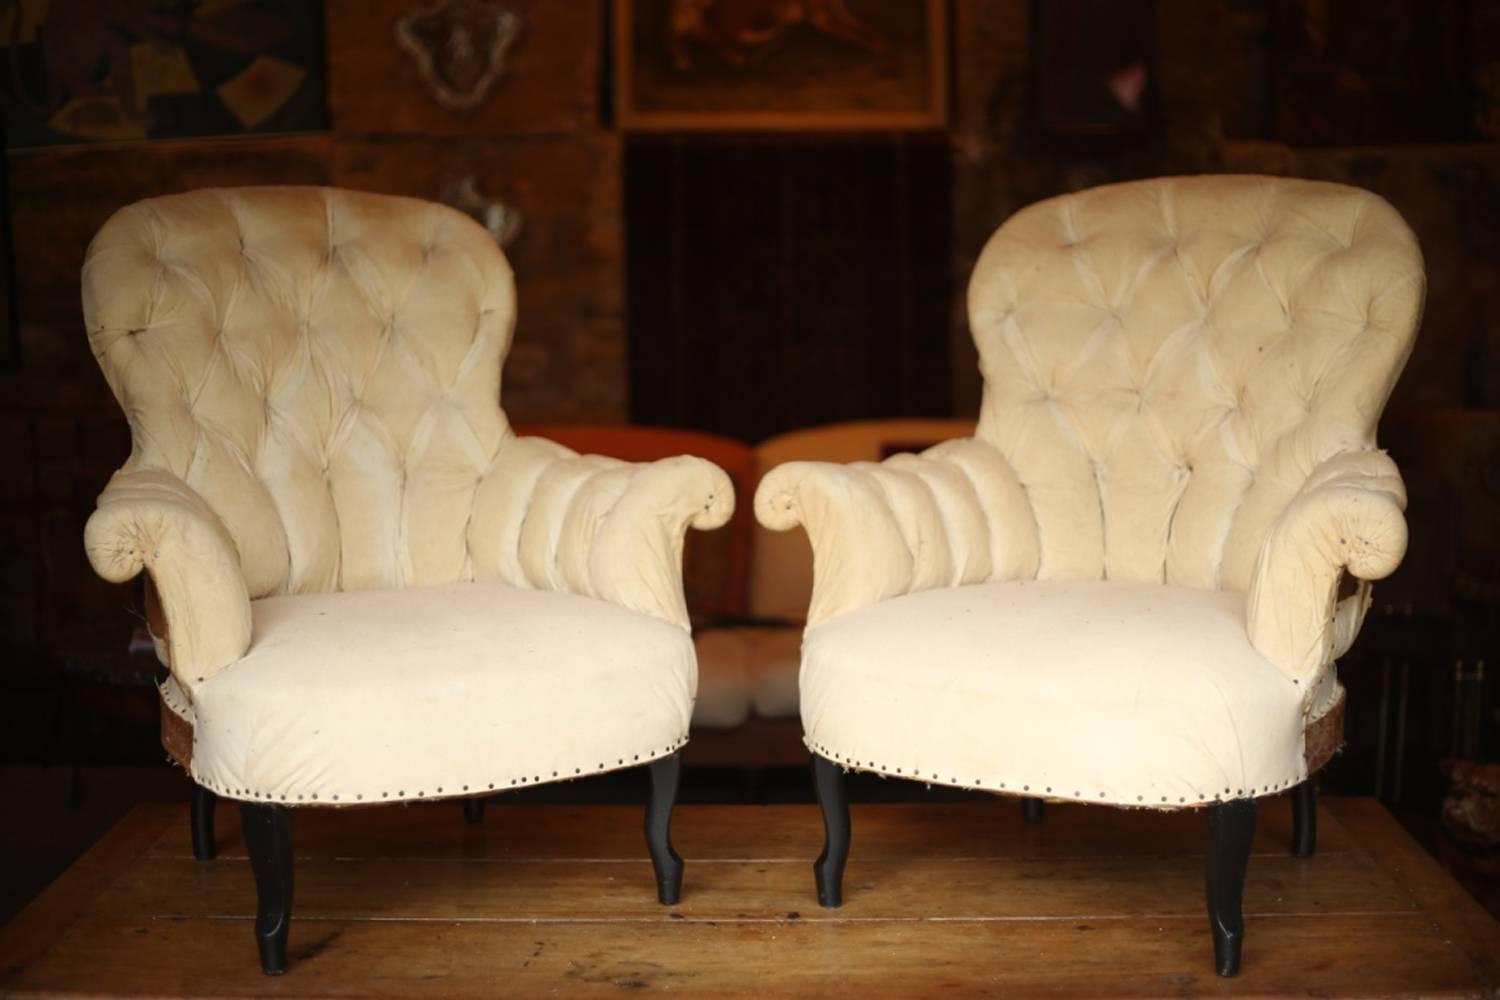 These are an absolutely gorgeous pair of Napoleon III buttoned back armchairs. Rare design and top quality finish ready now for upholstery. Perfect order with newly sprung seats making these extremely comfy. They have stunning carved cabriole